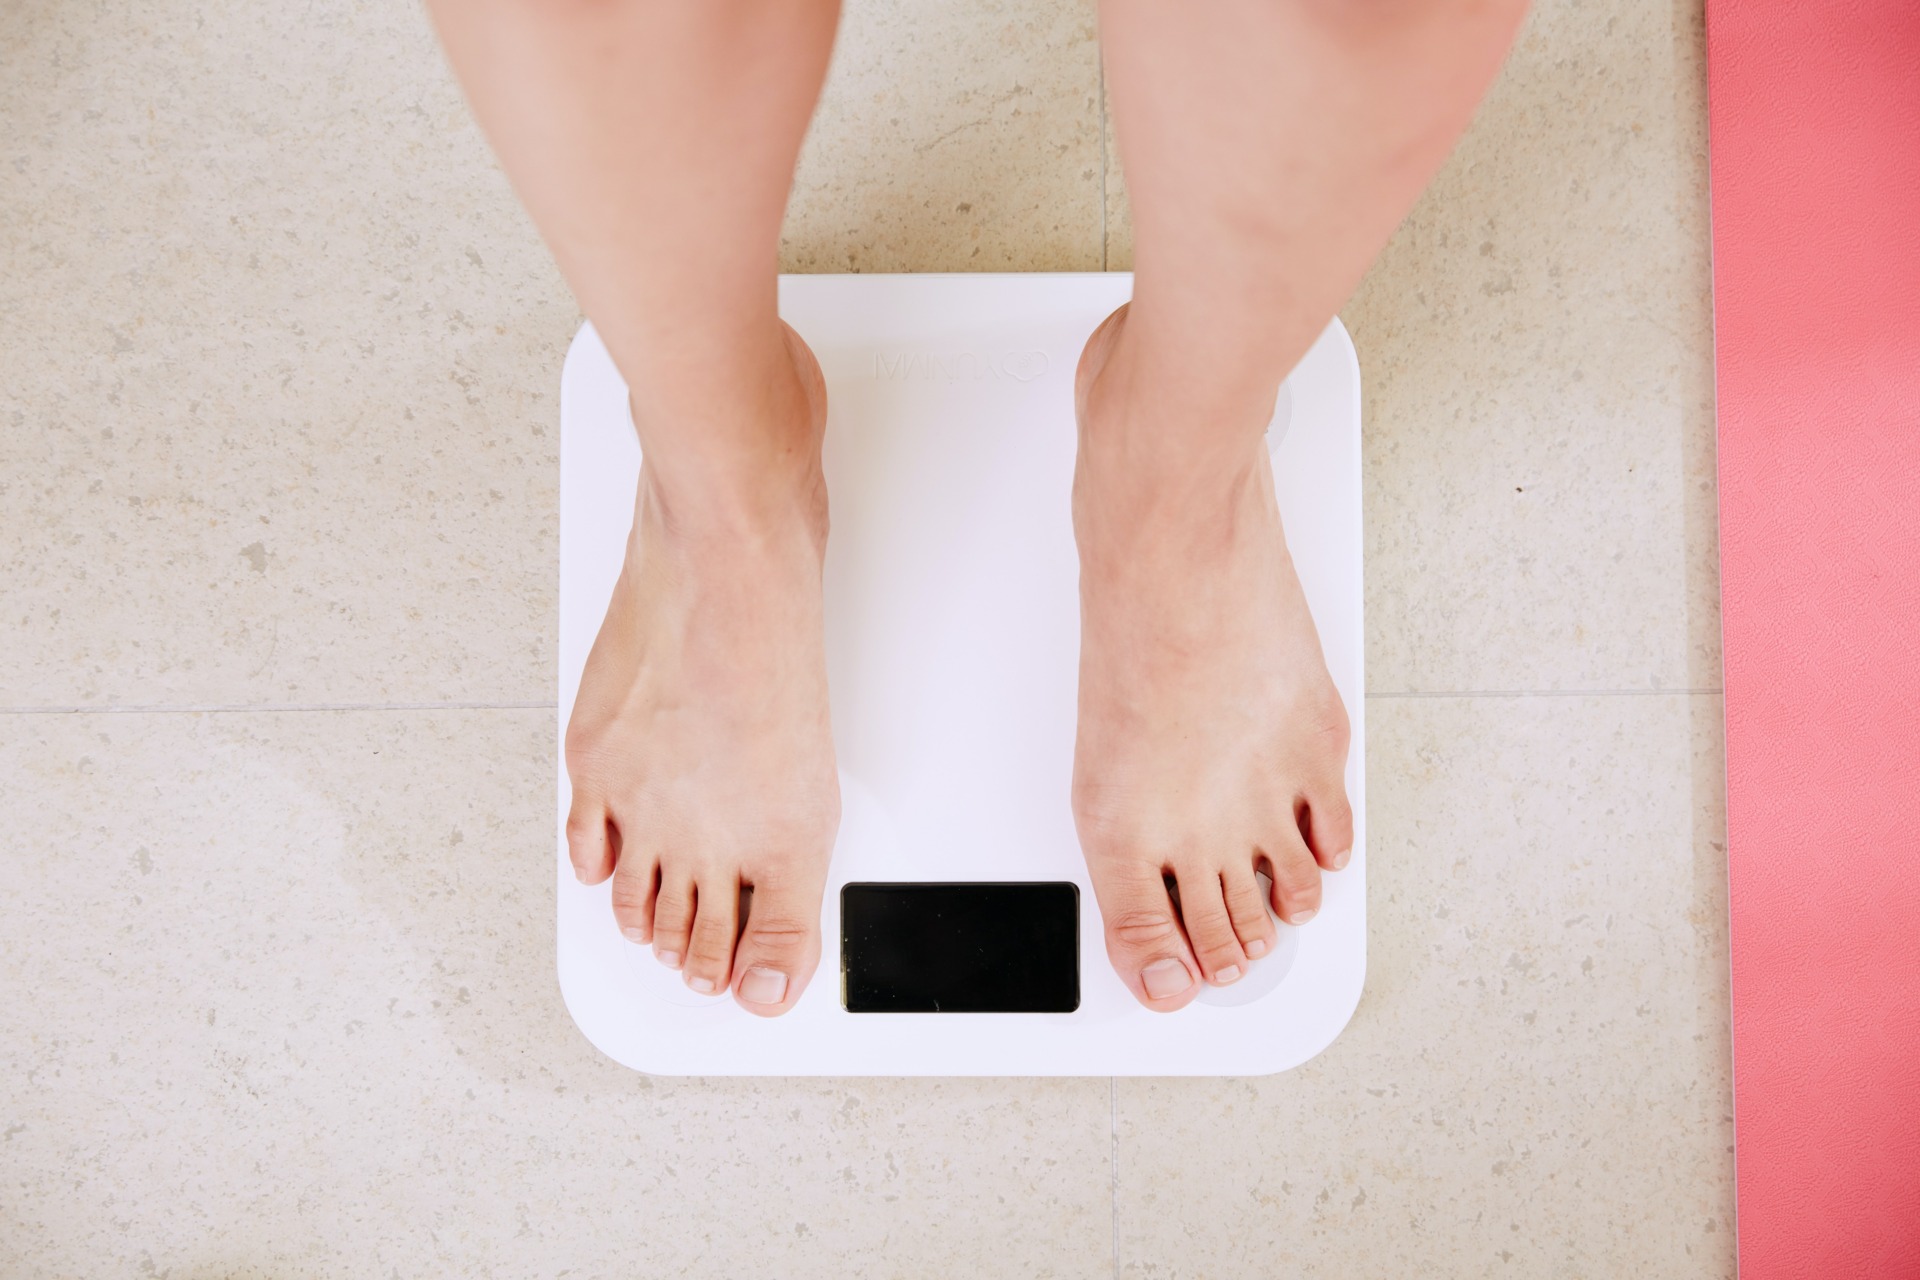 Feet on scale, in relation to questions about cannabis and weight loss